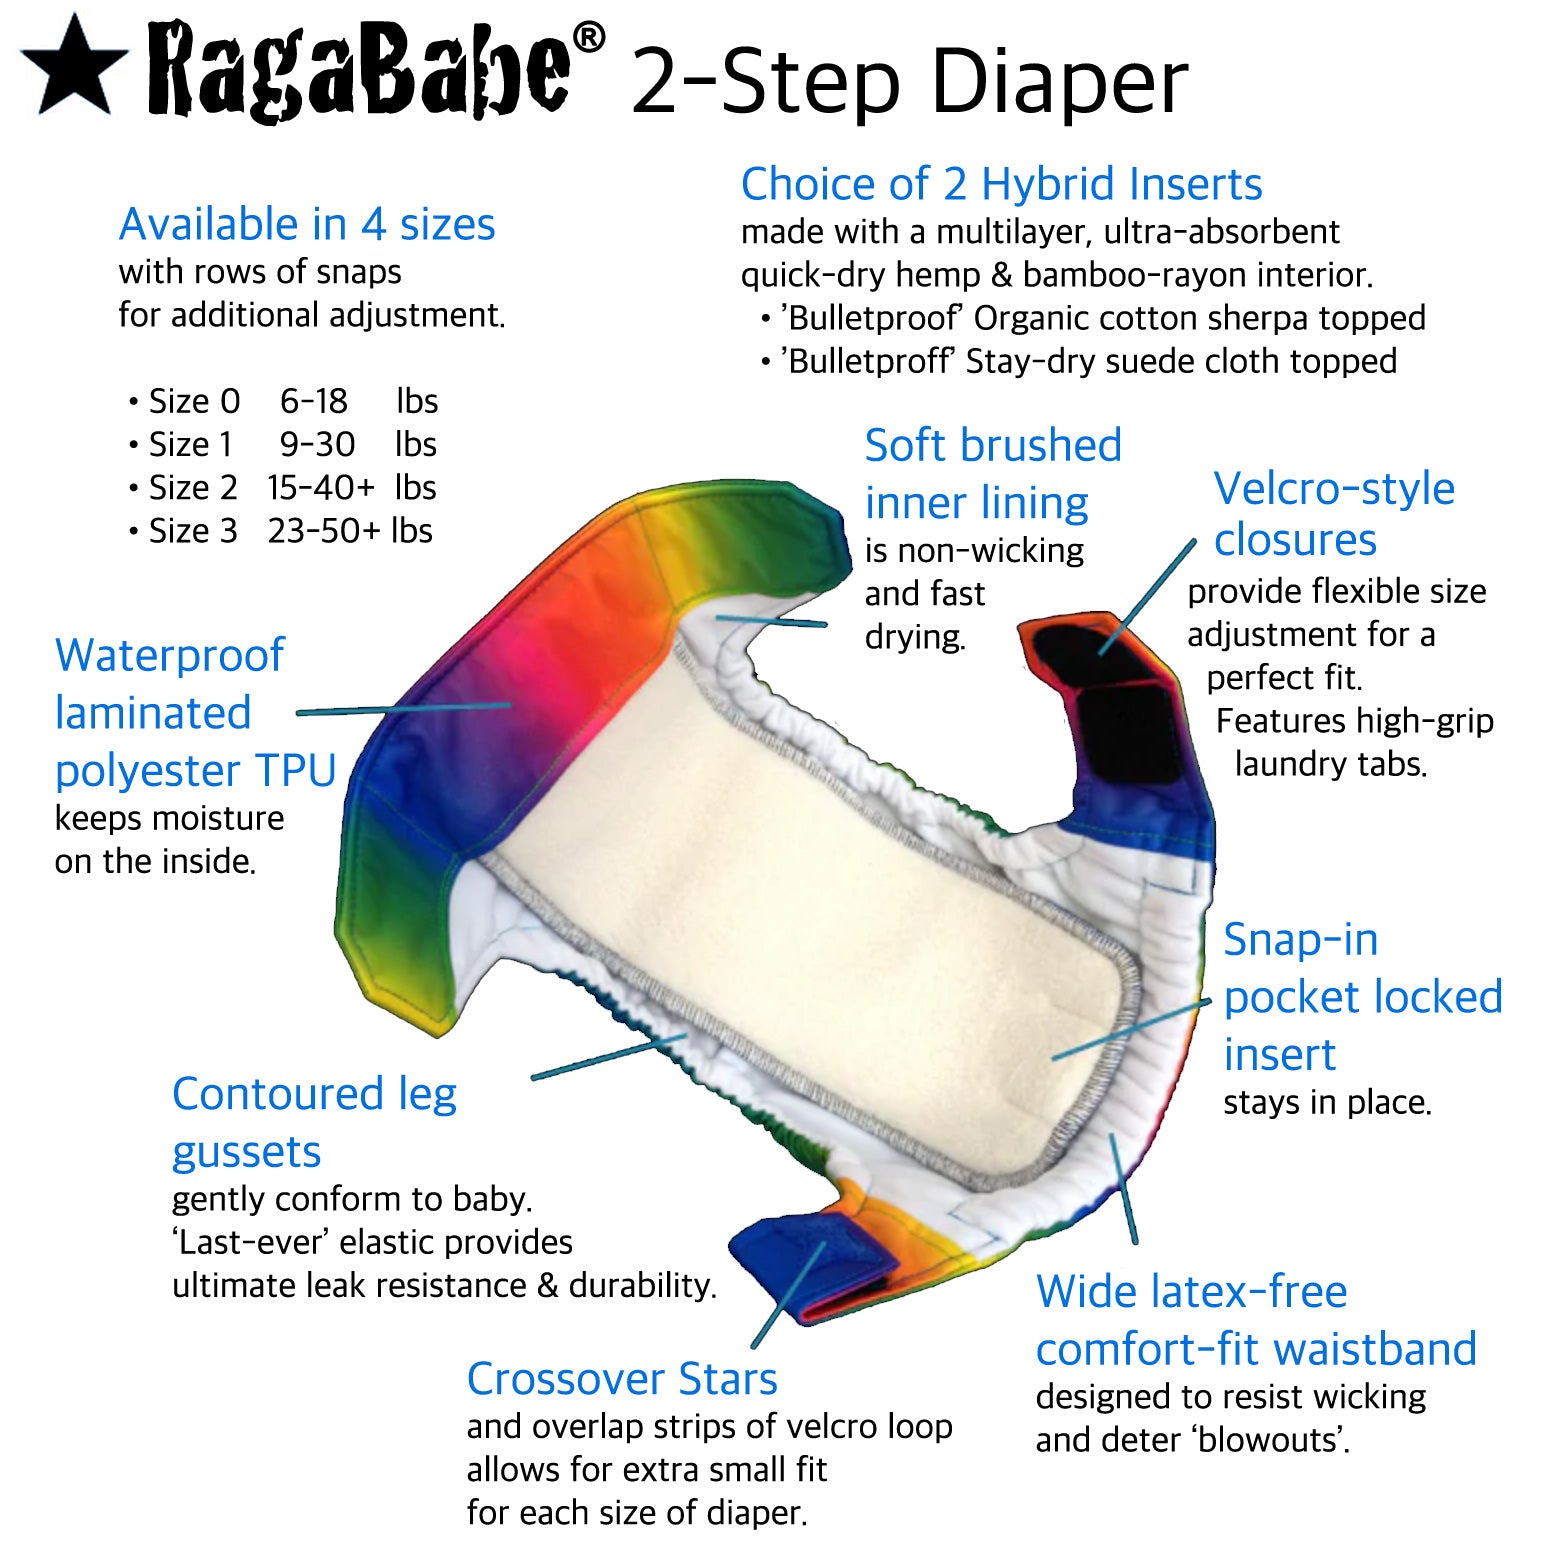 Baby Stay-Dry Hemp Night Fitted Cloth Diaper, One Size